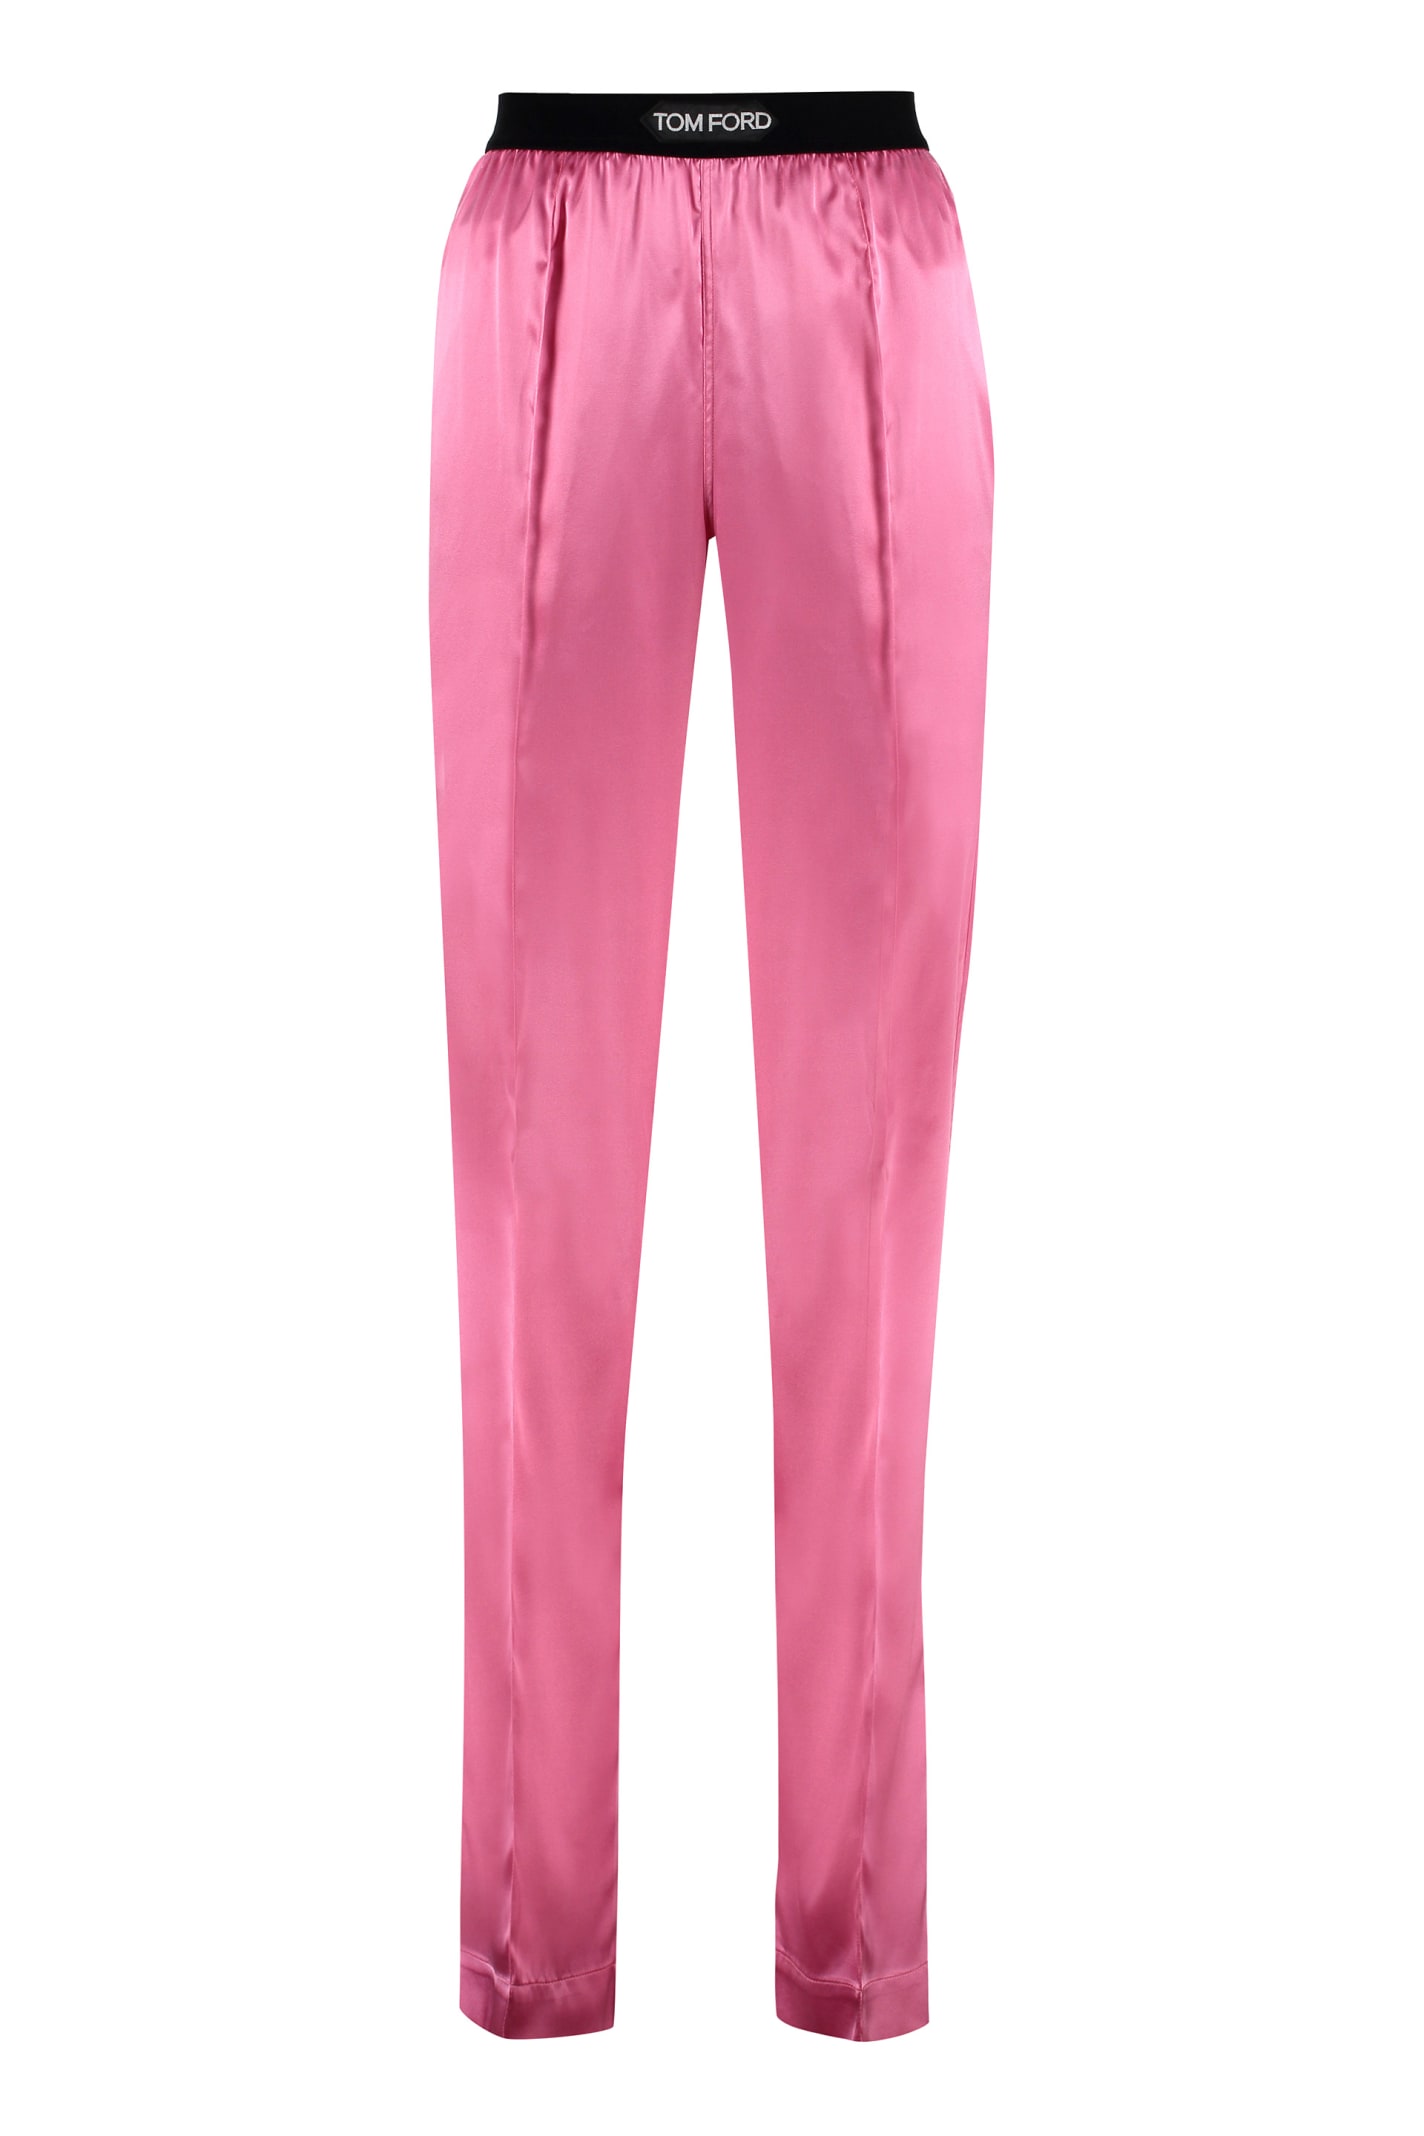 Tom Ford Satin Trousers